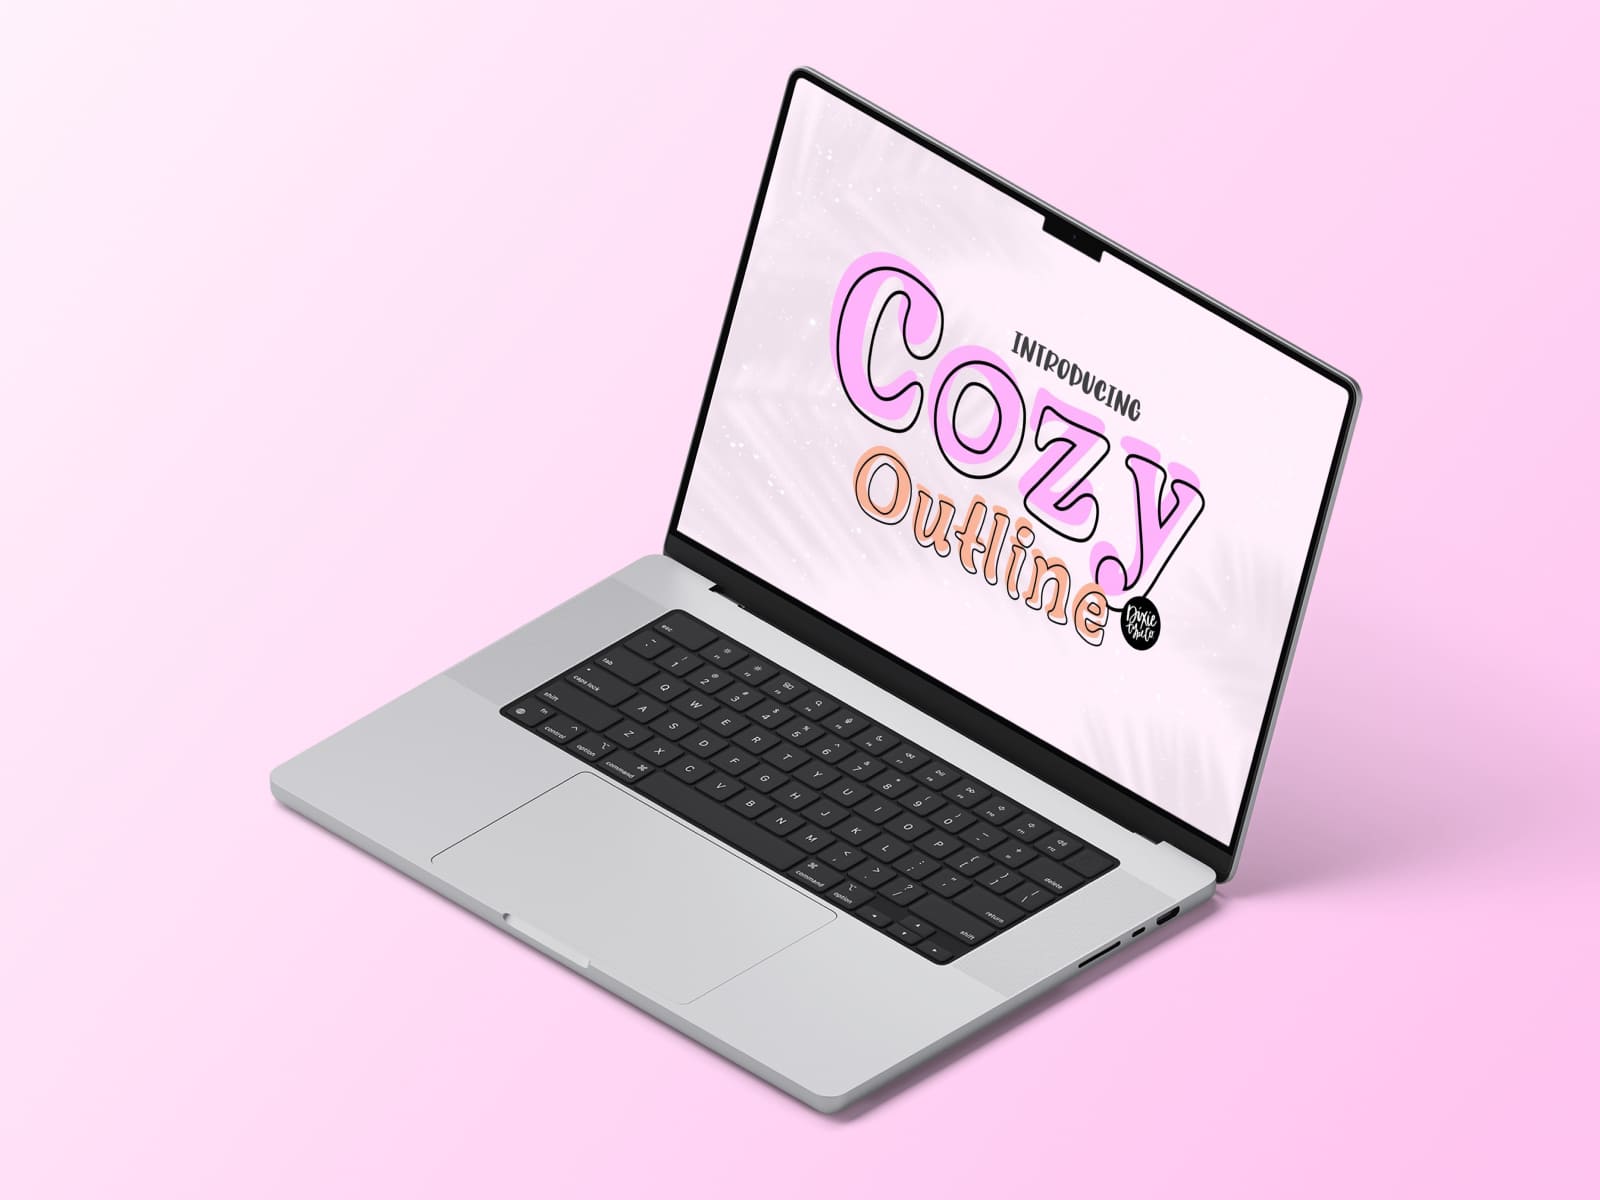 Introducing Cozy Outline On The Laptop.